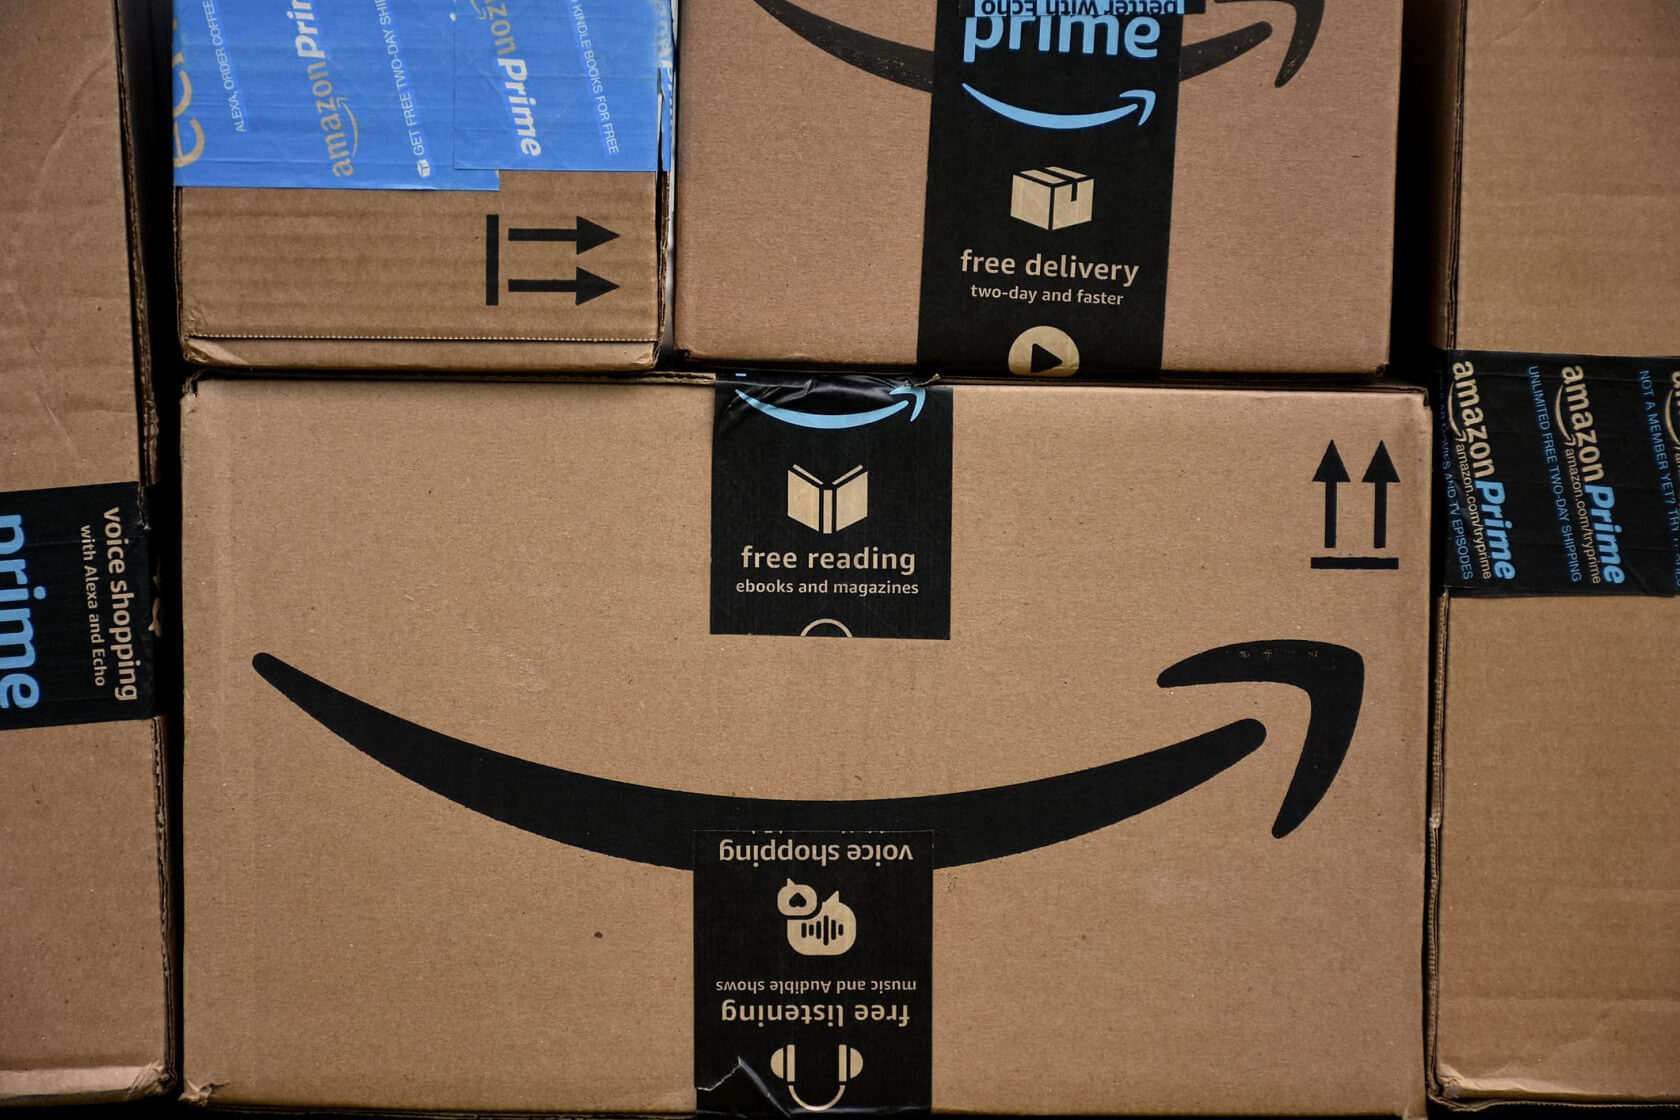 Report: Amazon tests integrity of its drivers by using fake packages as traps